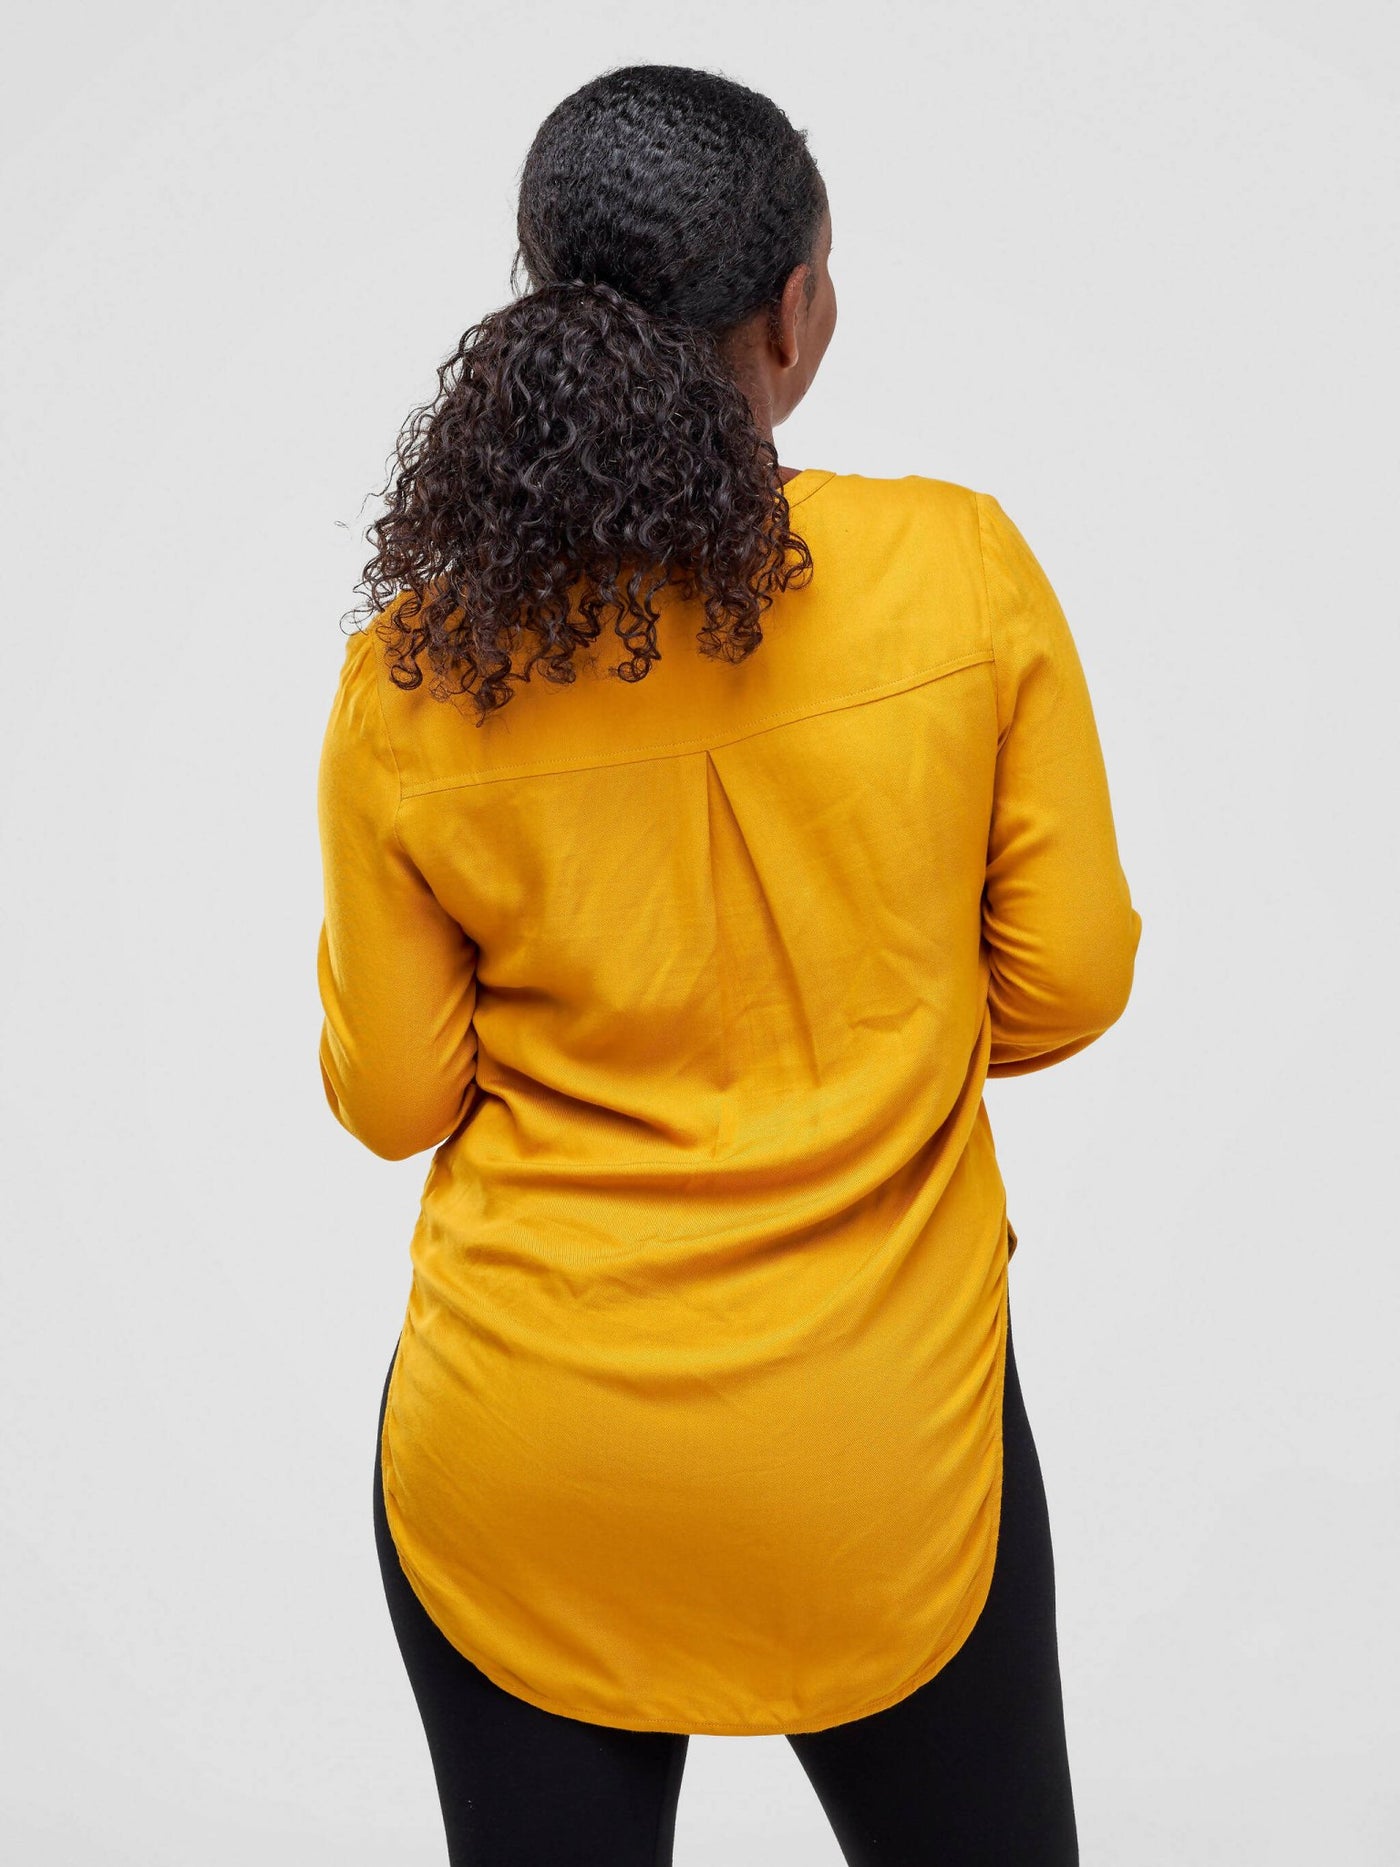 Waki Collections Fitted Fit Top - Mustard - Shopzetu